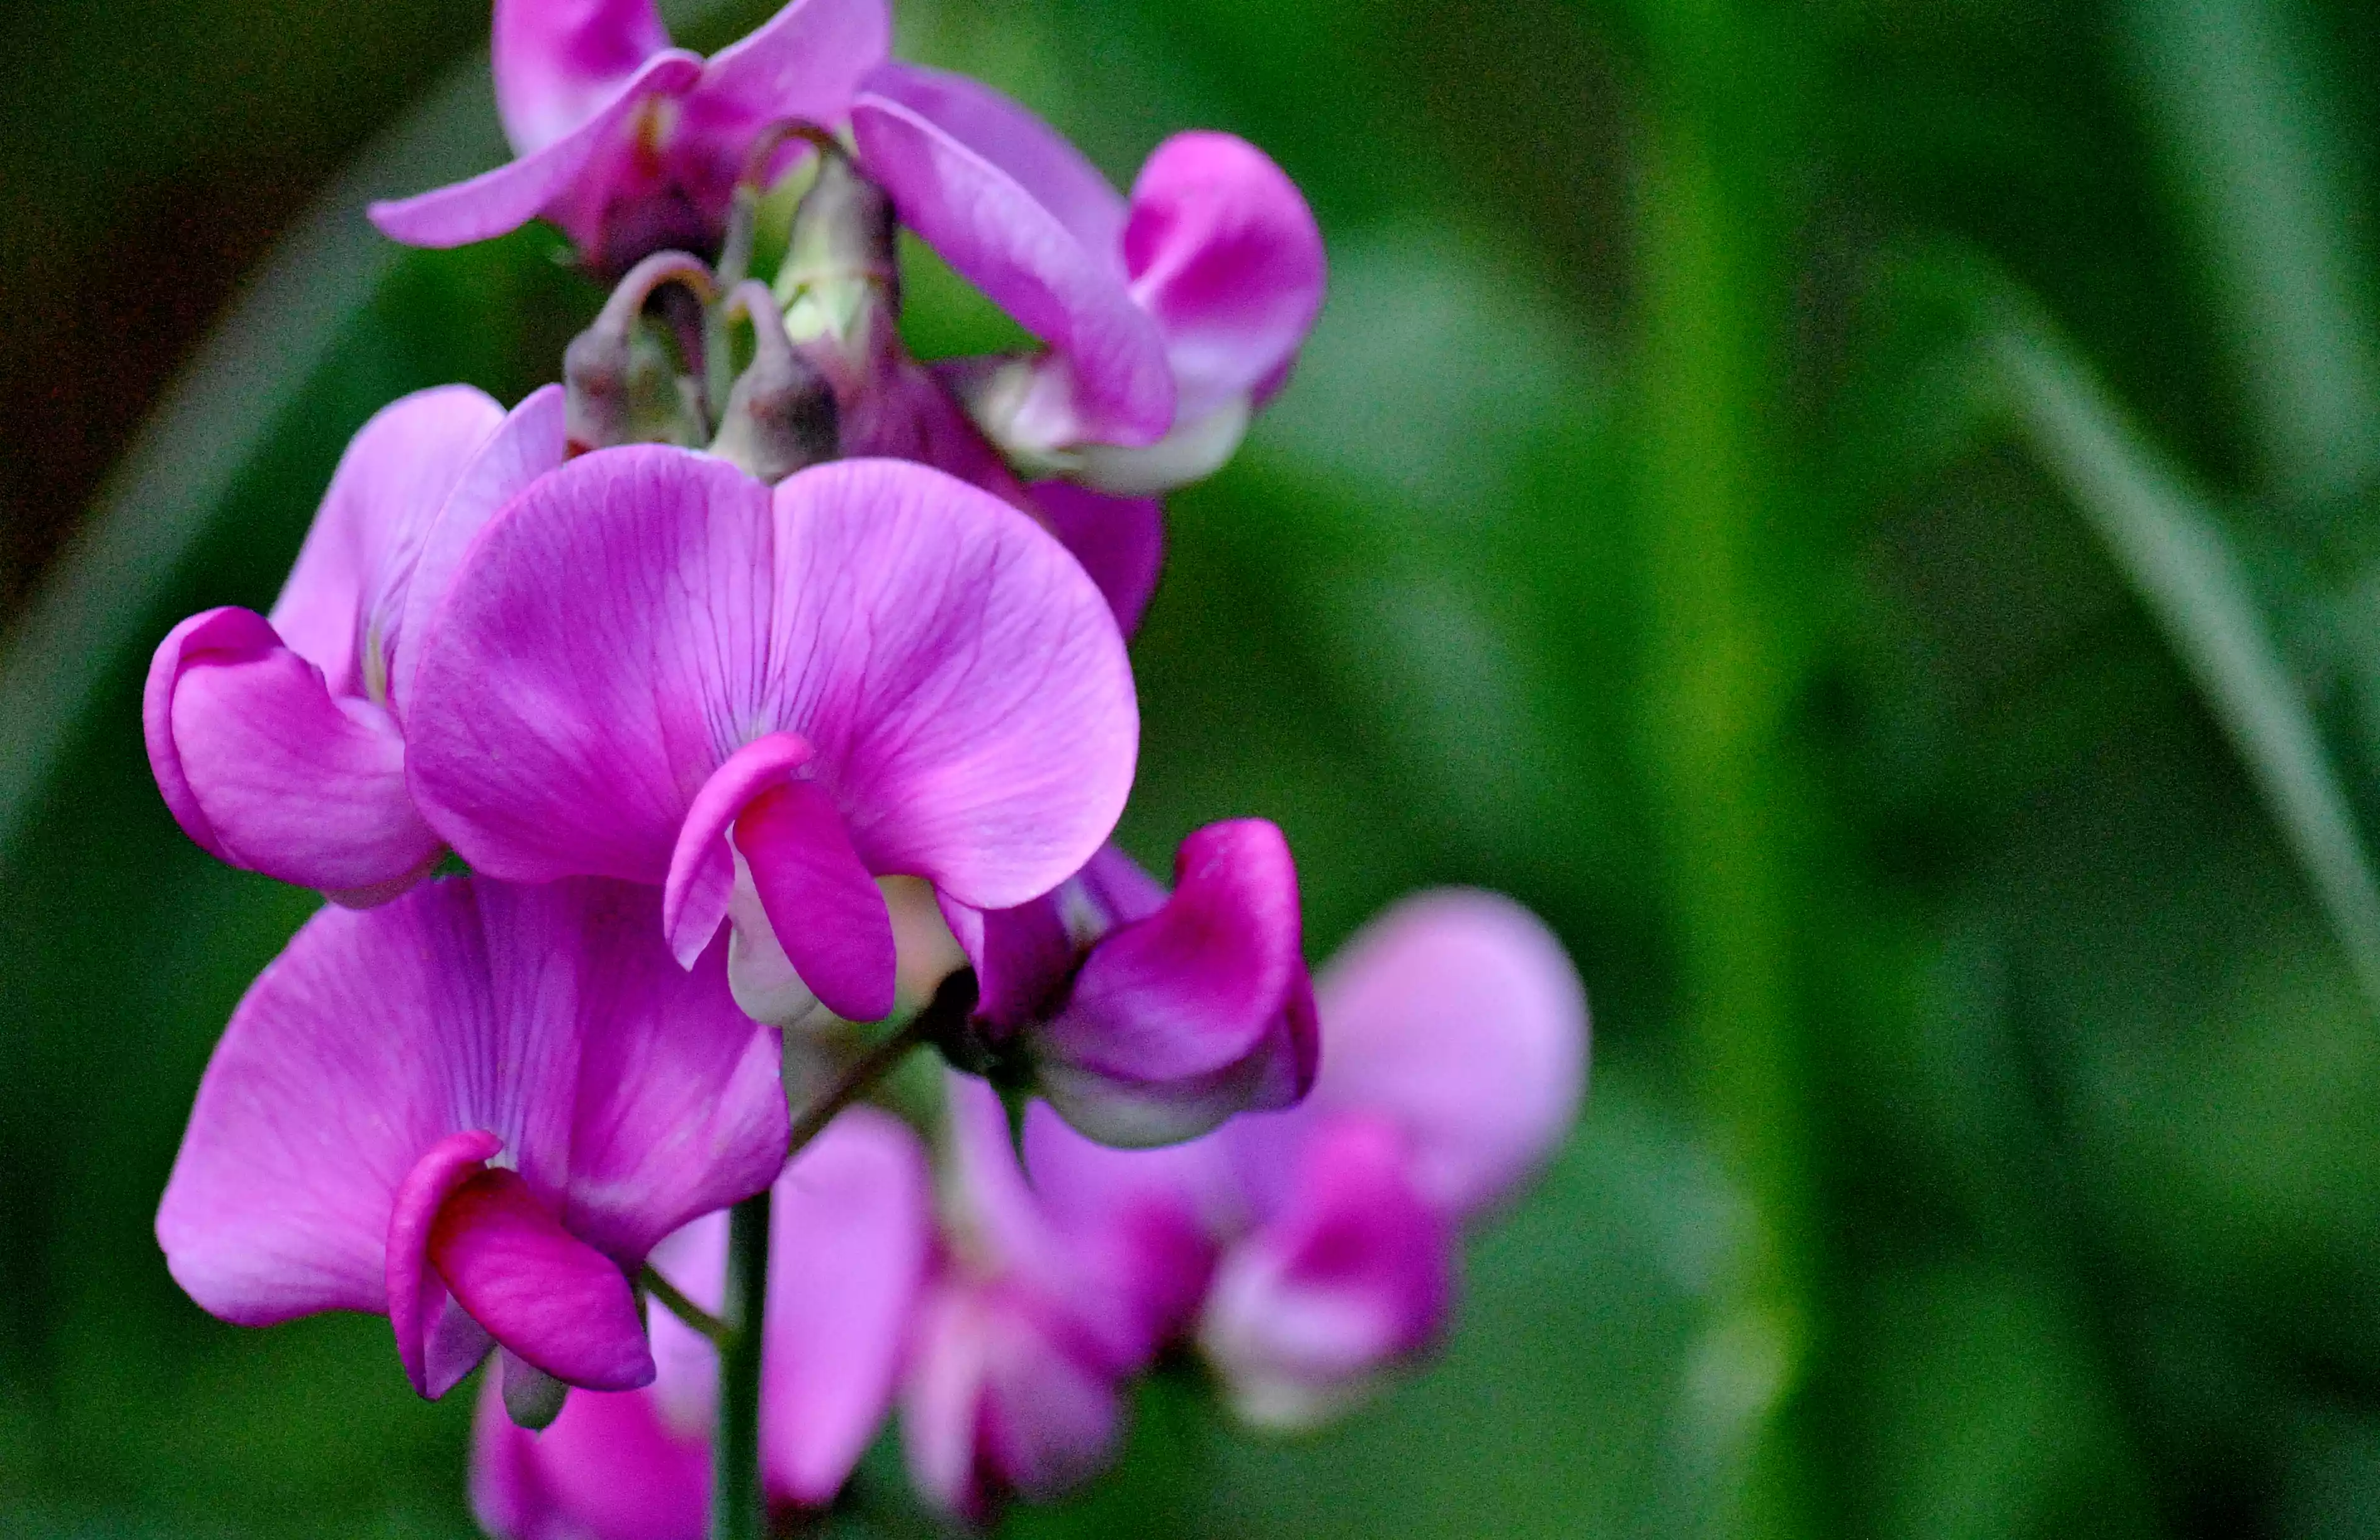 Gorgeously vibrant sweet pea flowers hang from the vine